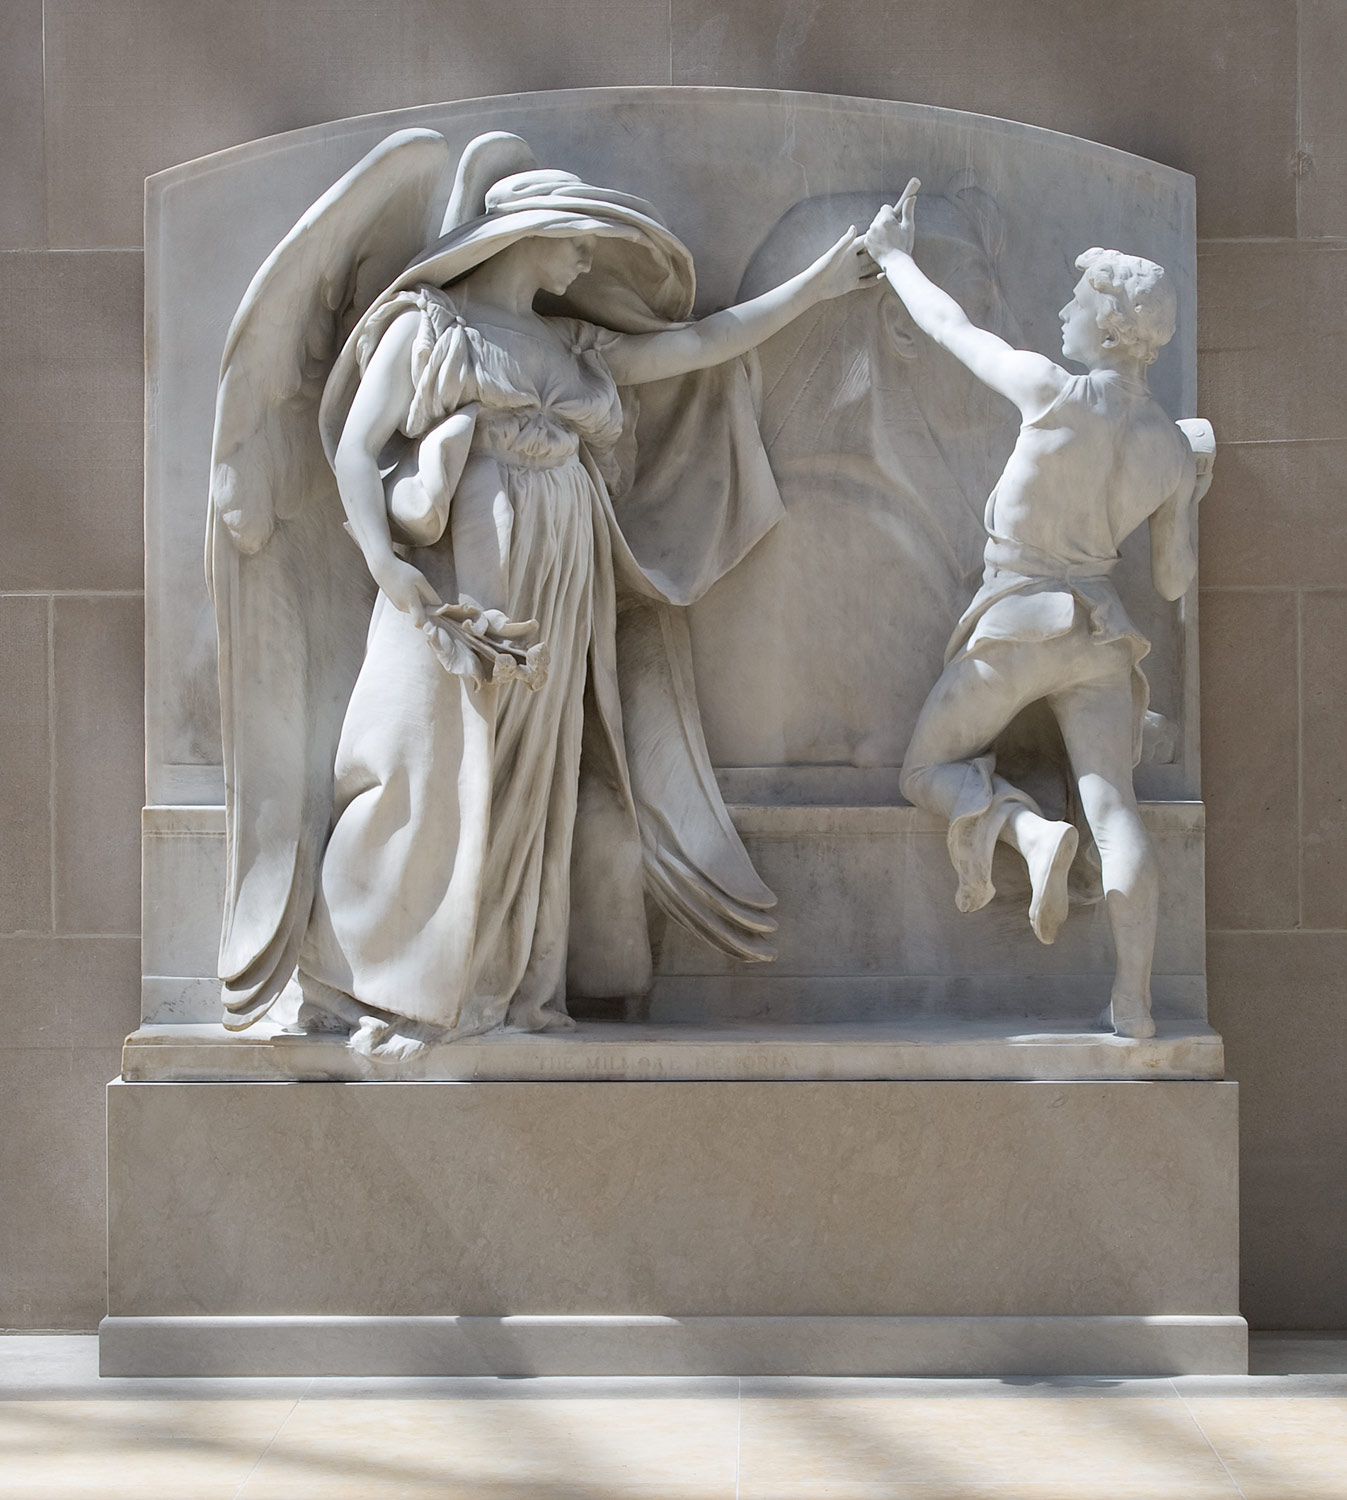 Daniel Chester French An American Sculptor